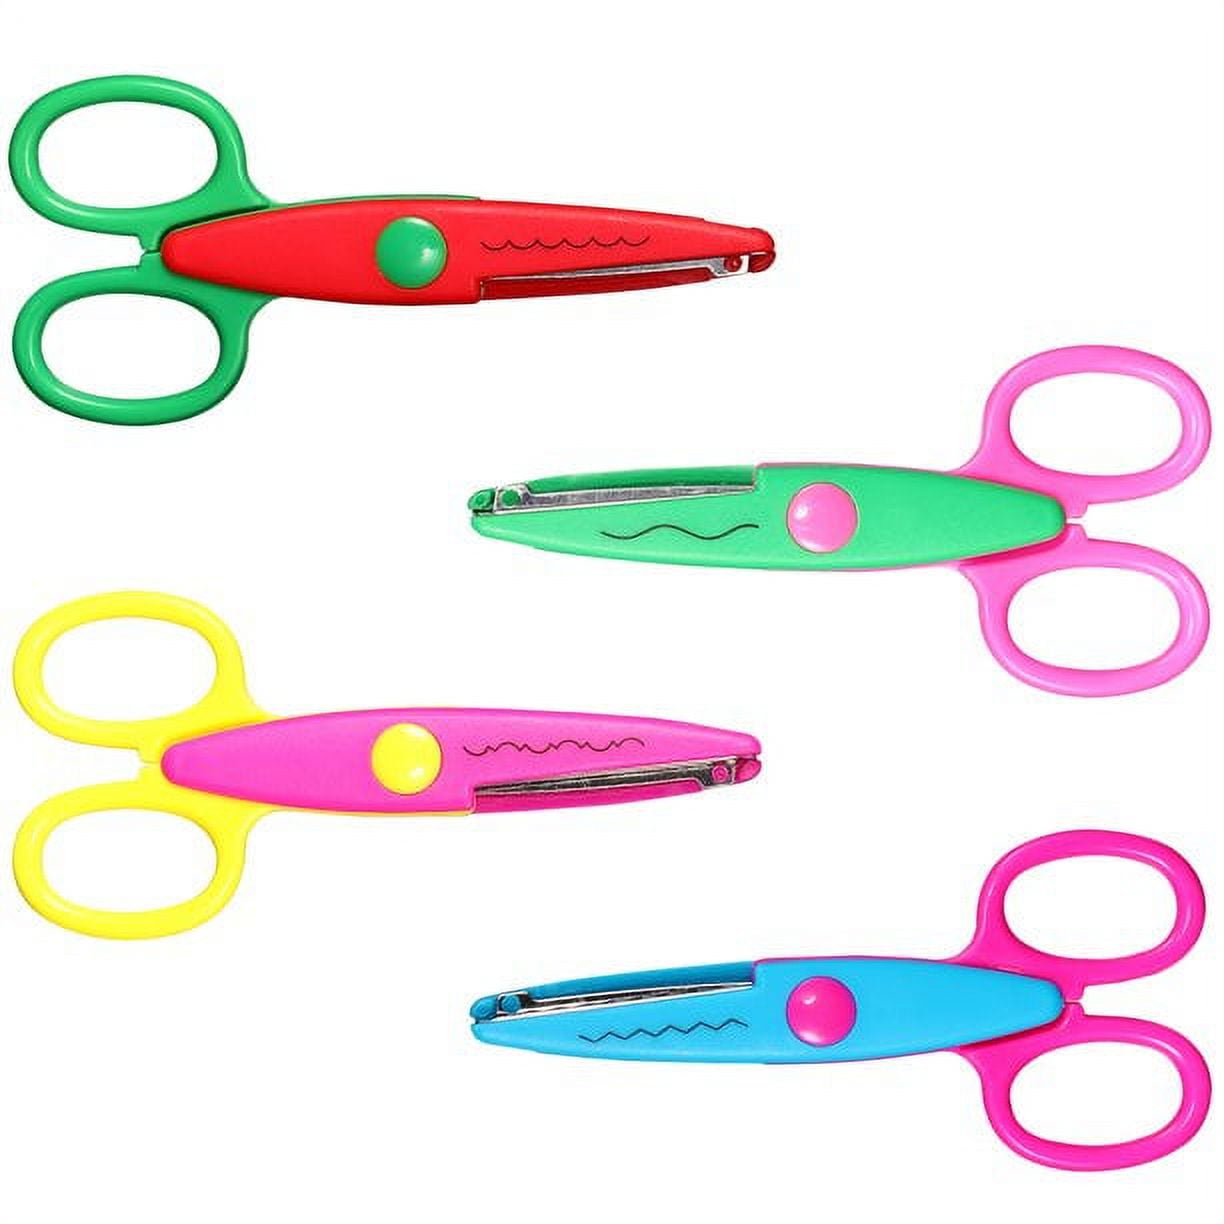 CANARY Kids Scissors Craft Scissors Decorative Edge, Safety Blunt Tip  Japanese Stainless Steel Blade, Zig Zag Scissors for Preschool Child, Safe  Paper Edger Tool, Made in JAPAN, Wavy Round Edge(4 styles)(USD$6) Blue